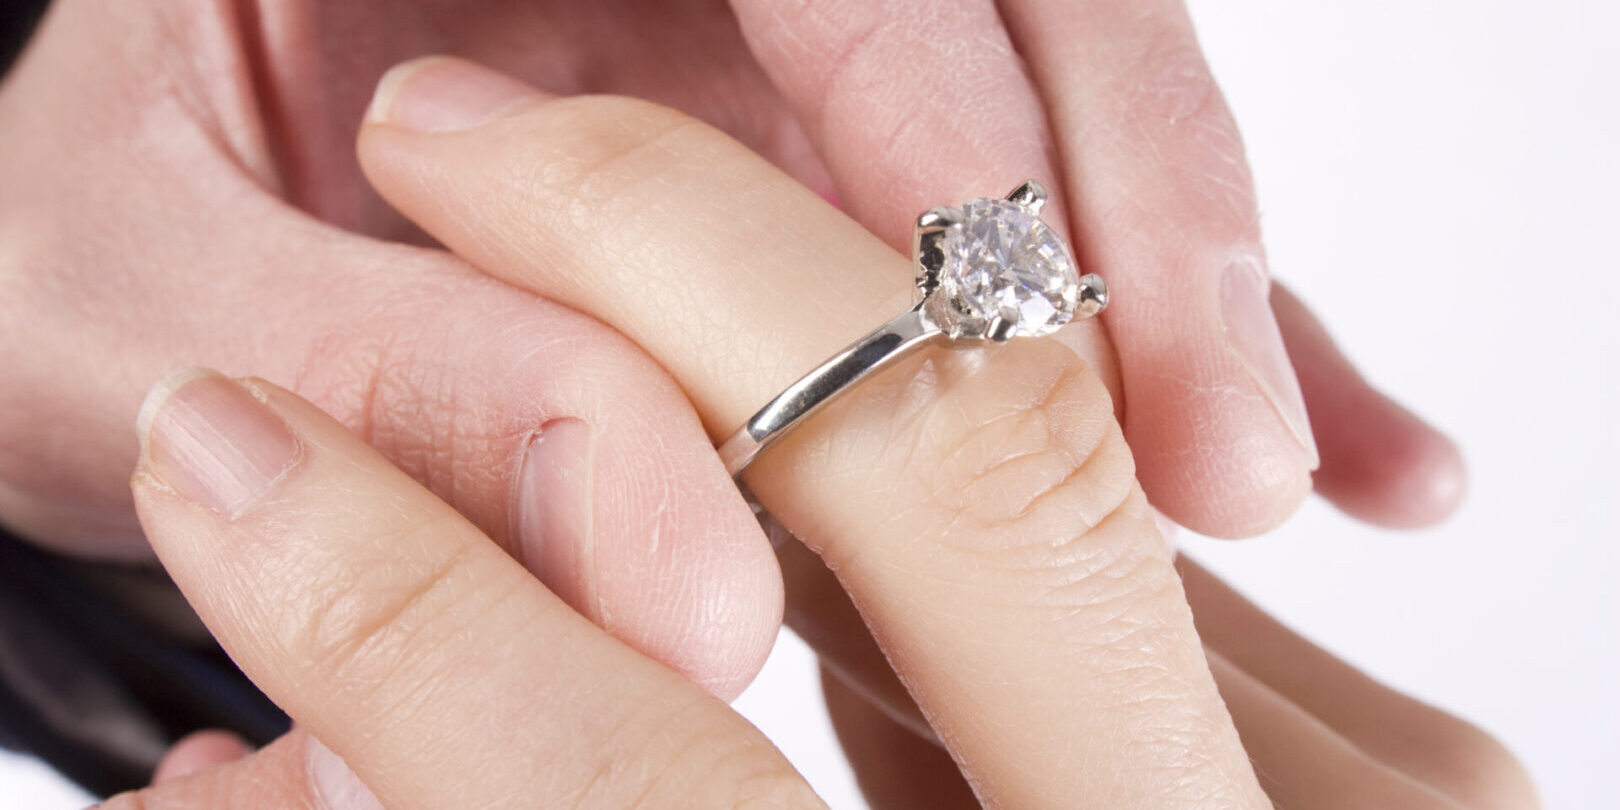 A man slides a diamond ring on his fiance's finger